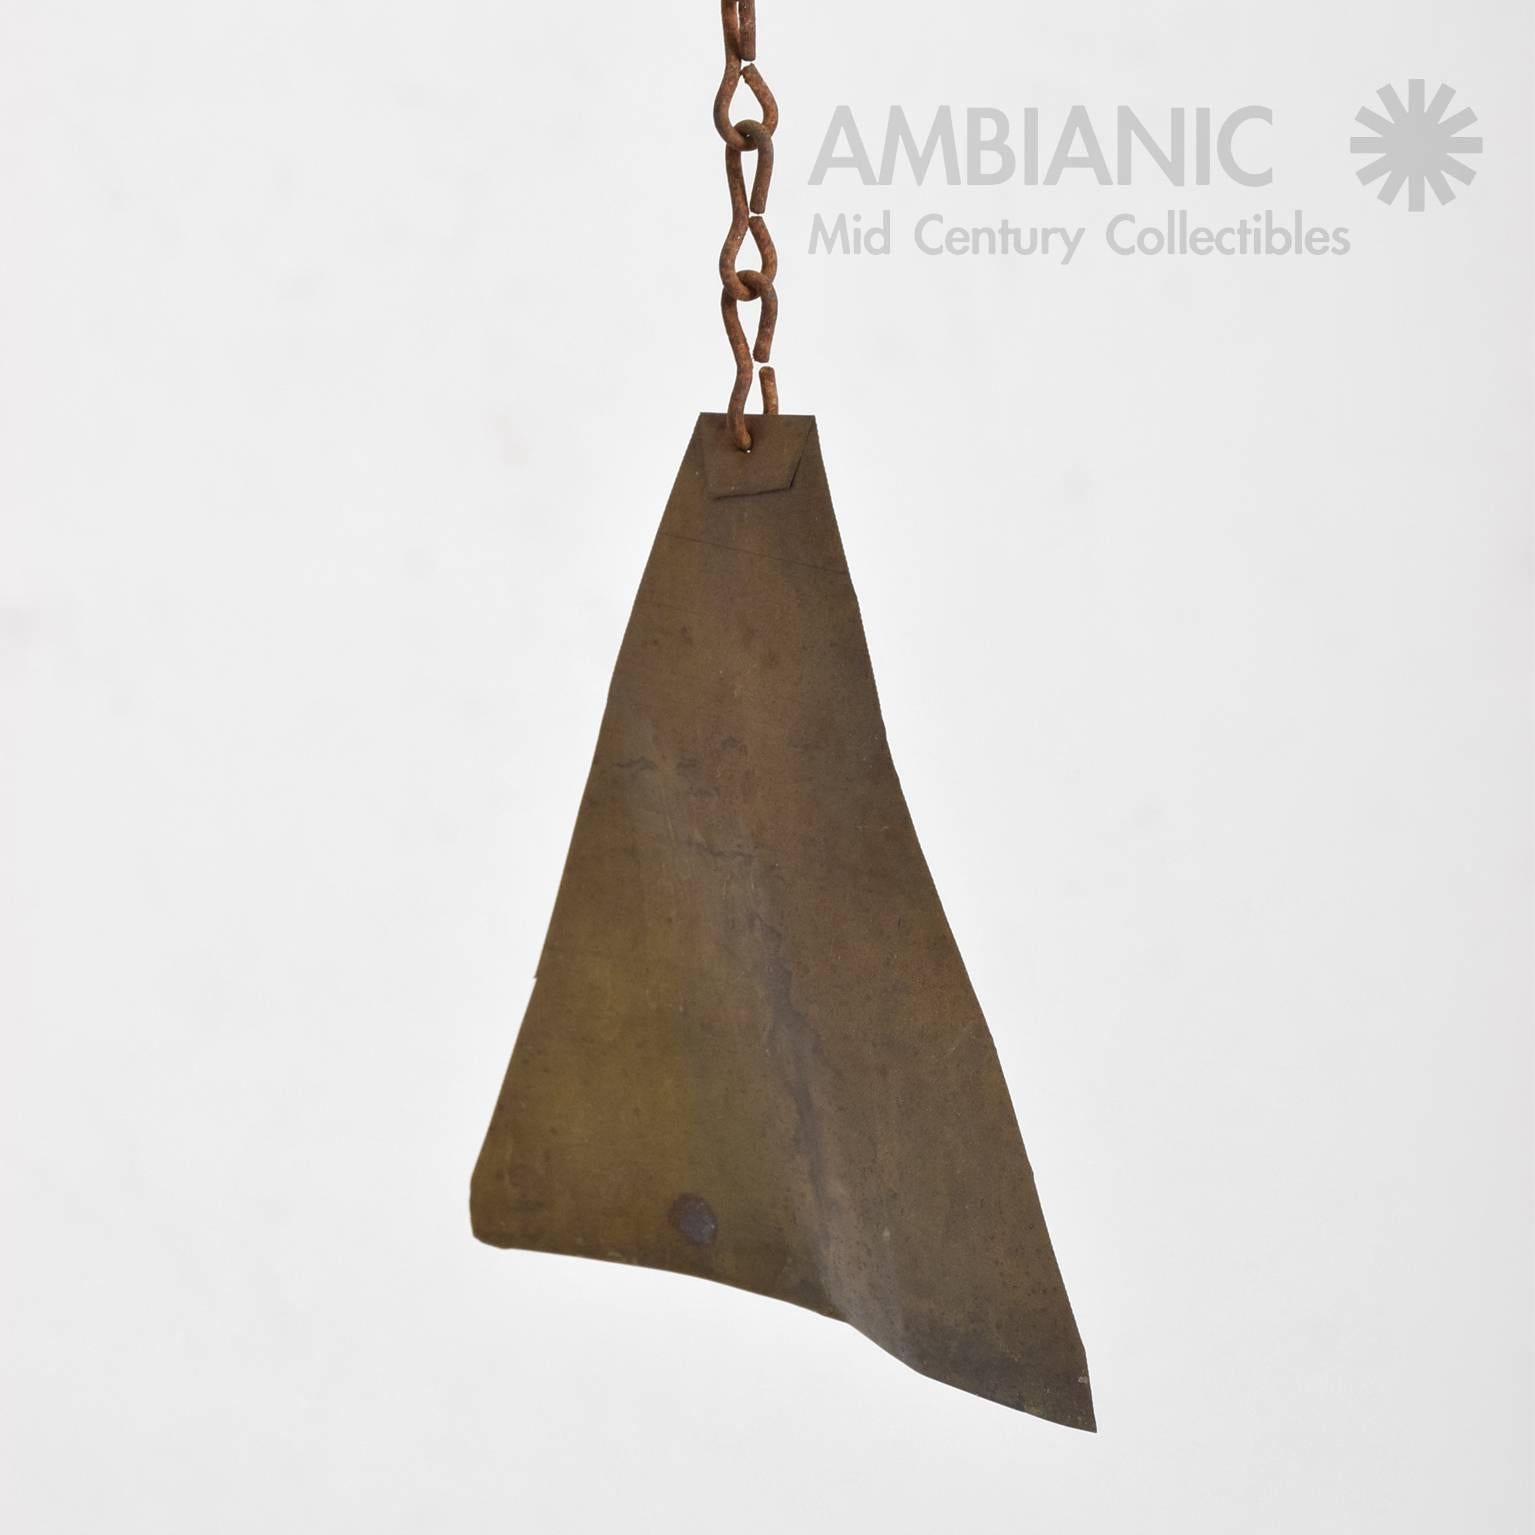 For your consideration a vintage wind chime of a fish head in patinated bronze with brass wind catcher and original metal chain. 

Unmarked, no information on the maker. 
USA, circa 1960s

Measures: 32